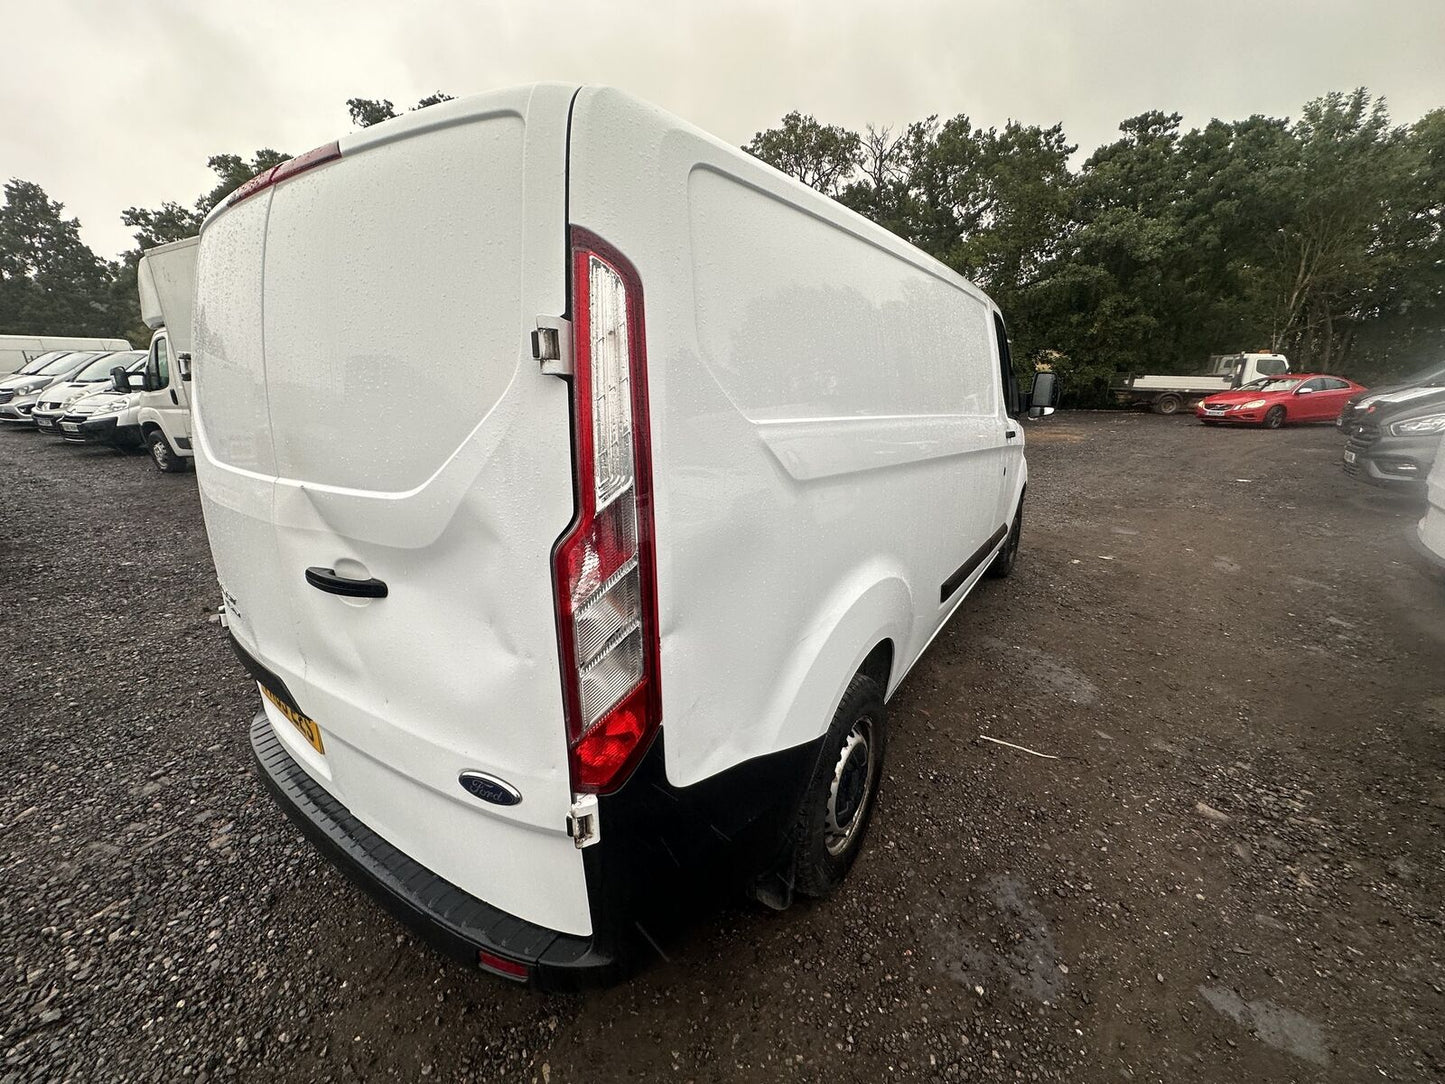 Bid on 69 PLATE FORD TRANSIT CUSTOM 300 L2 DIESEL, PERFECT VAN FOR BUSINESS 120K MILES (NO VAT ON HAMMERR)- Buy &amp; Sell on Auction with EAMA Group